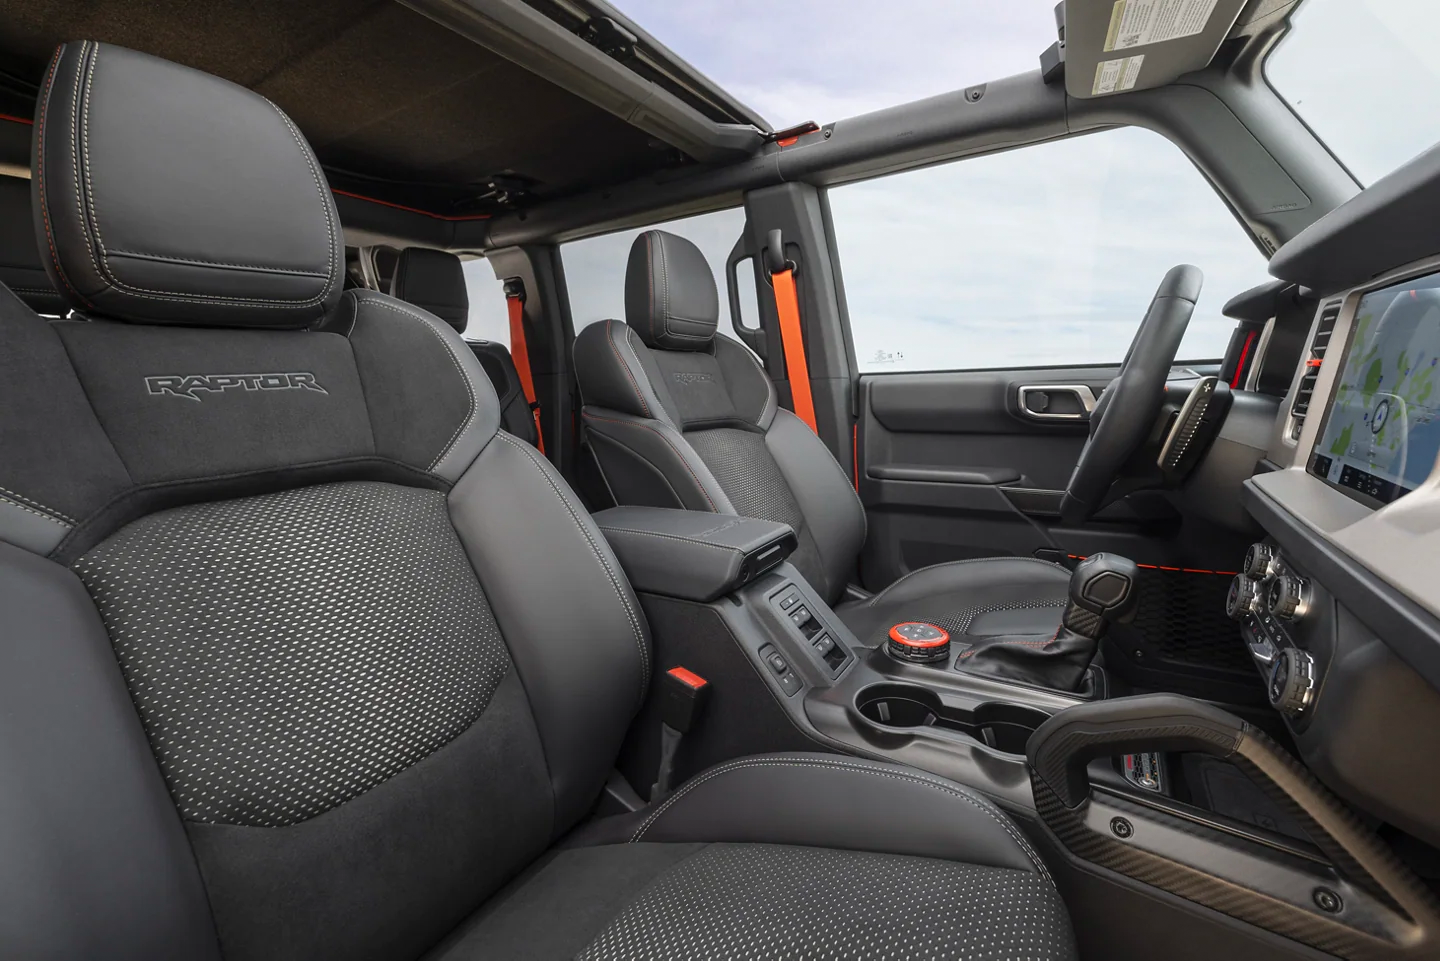 AutoFair Ford in Manchester is a new and used Ford dealership in New Hampshire. Check out one of the best Ford SUVs, the new 2022 Ford Bronco Sport.